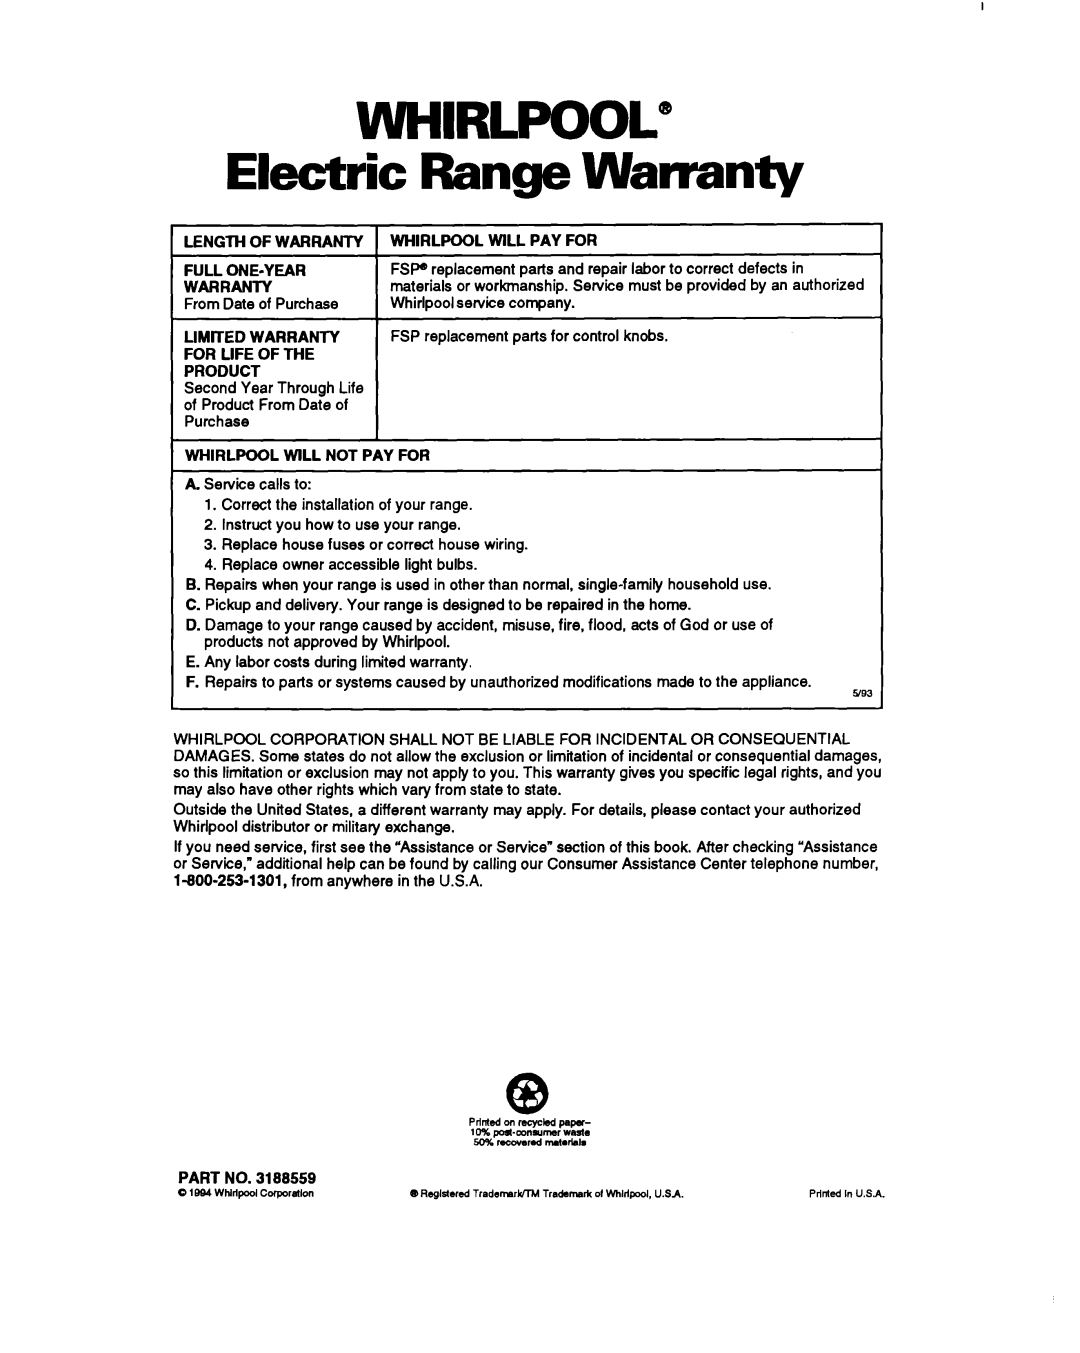 Whirlpool RS660BXB important safety instructions WHIRLPOOL” Electric Range Warranty 